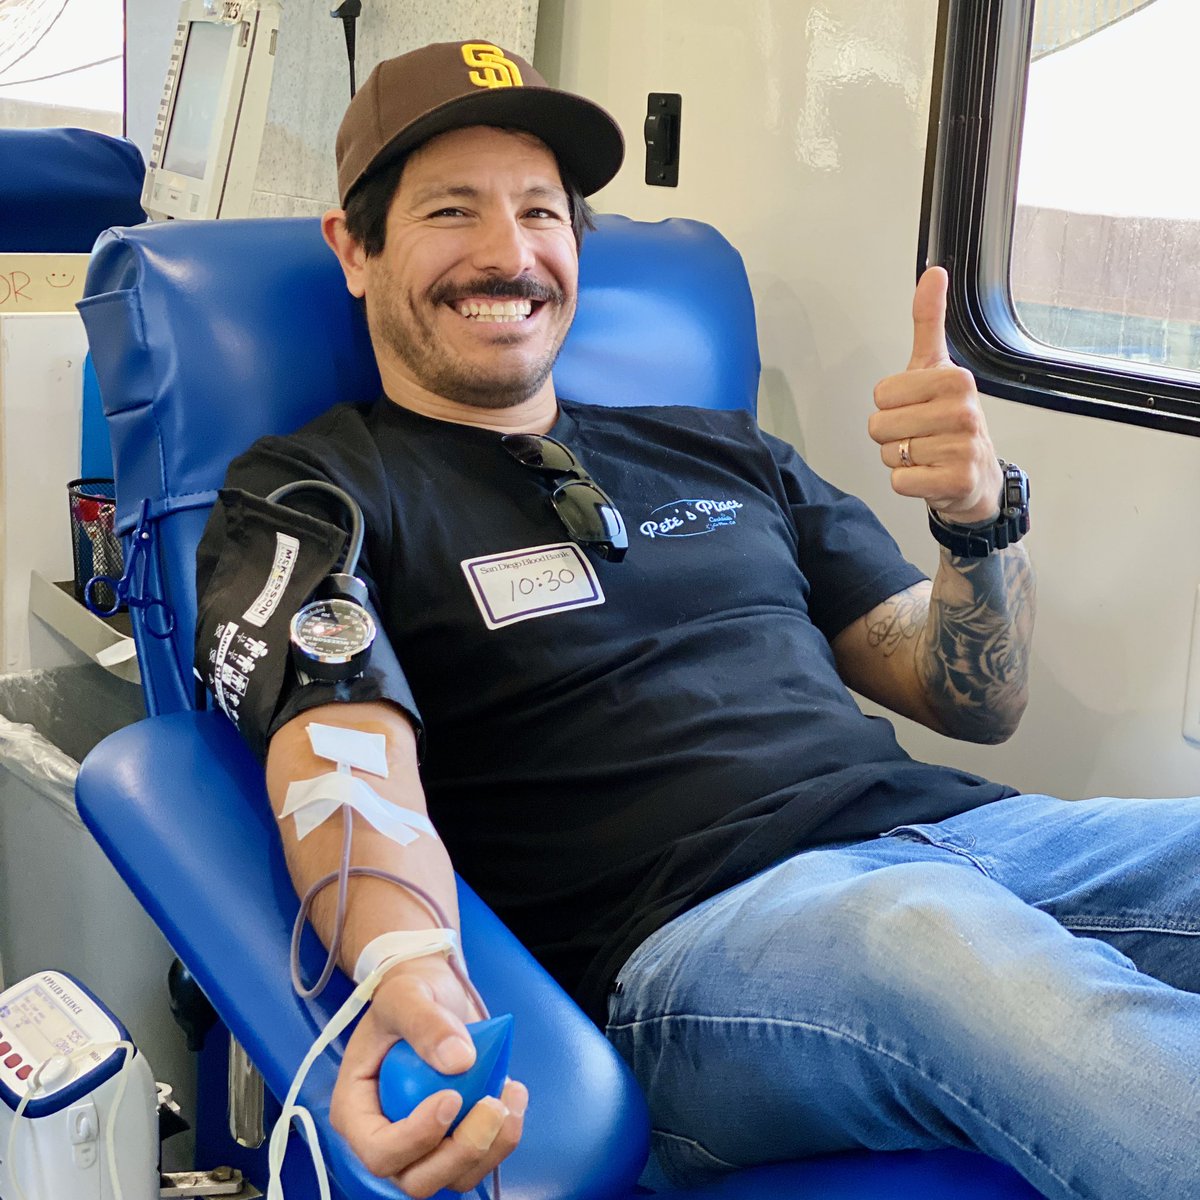 🎉Over 600 pints of blood were collected at the 8th Annual @Padres Summer Blood Drive presented by Sycuan Casino Resort! Huge thanks to everyone who joined us! 💪🩸